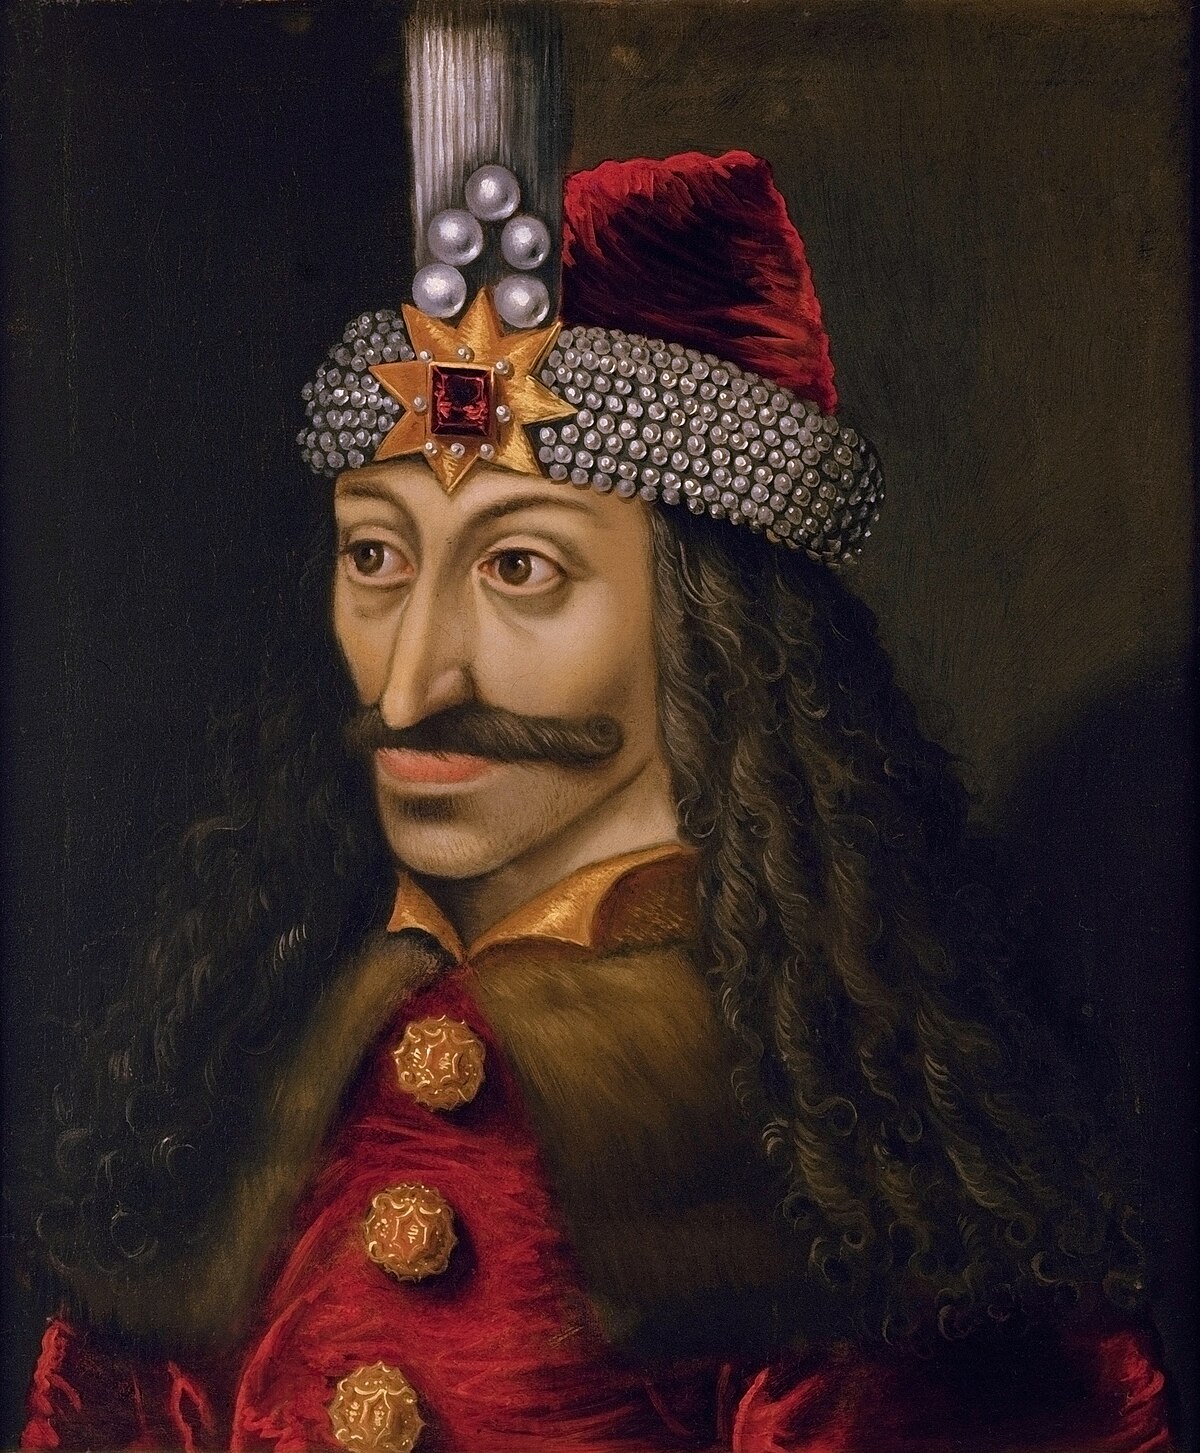 When I was watching Castlevania I did some research where the Dracula myth comes from and stumbled upon Vlad Tepes Dracula or by his nickname called Vlad the impaler. They are not sure about the numbers but you have to impale a lot of people to get that nickname. u/ZedsDeadZD